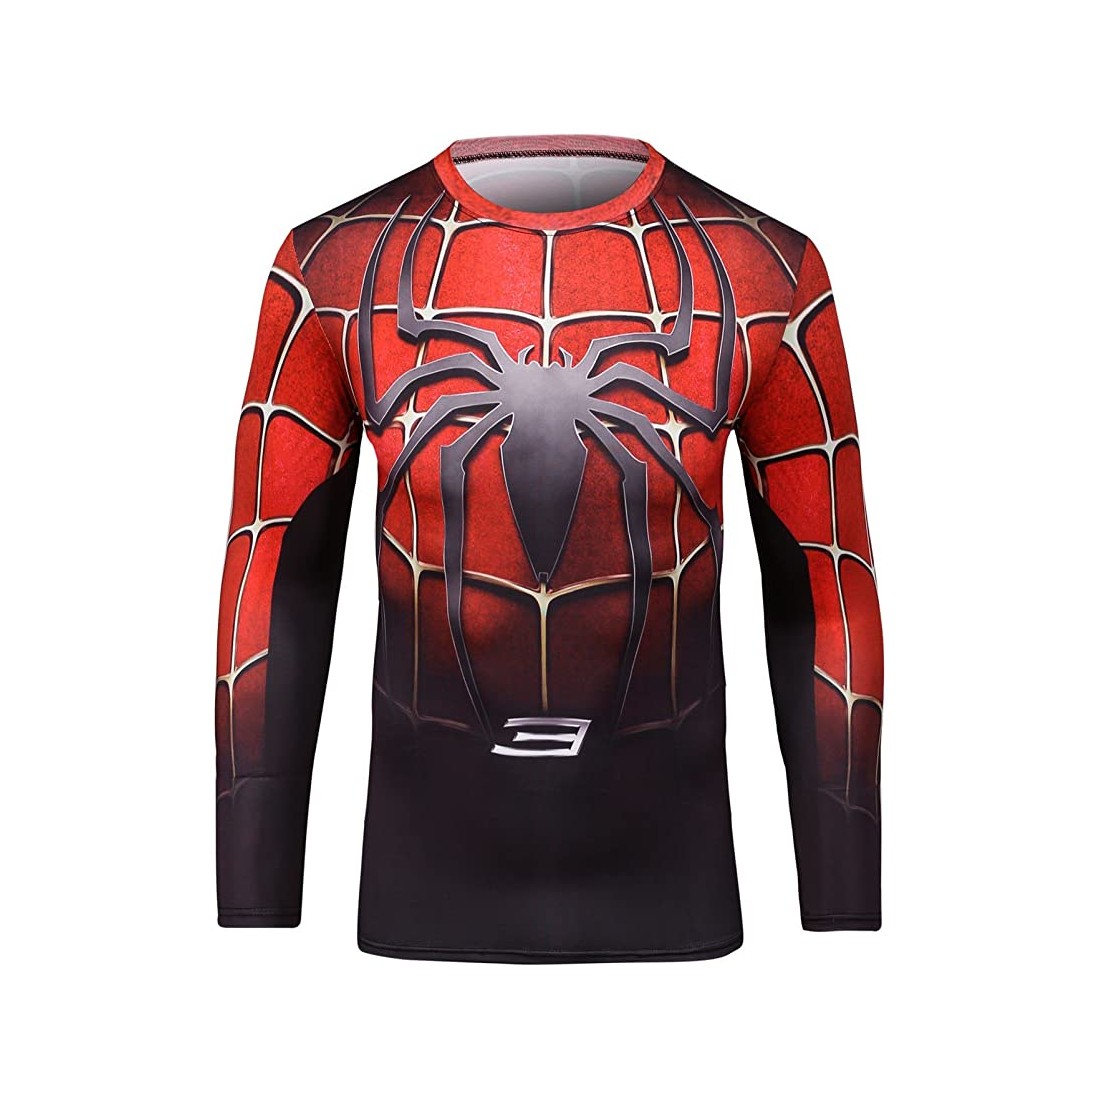 Men's Spiderman compression t-shirt, red-black, long sleeve. Size M